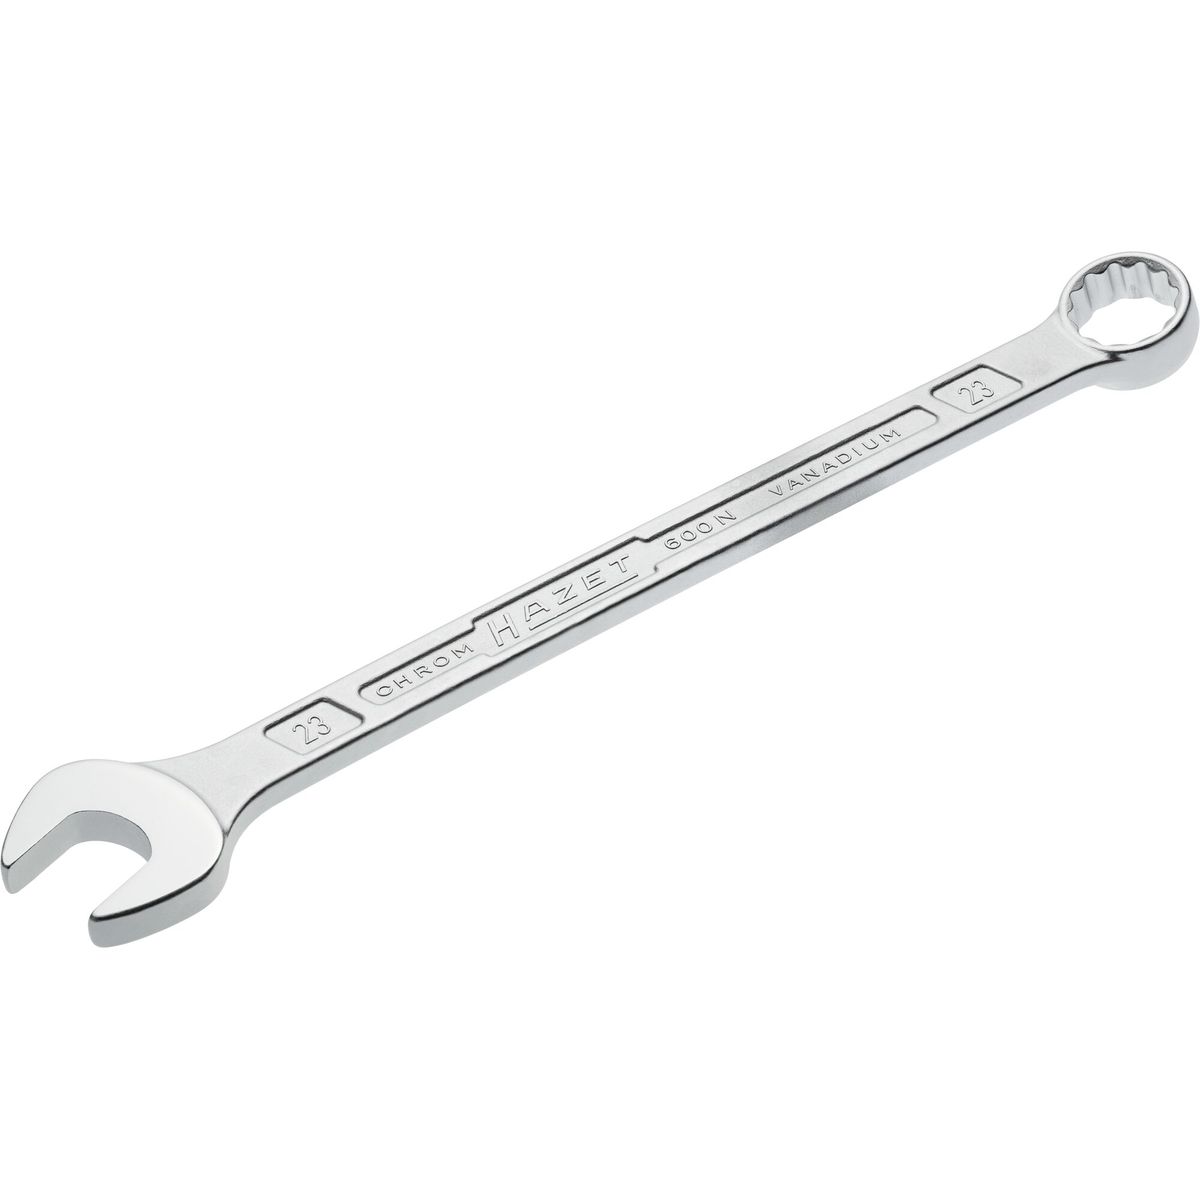 Combination Wrench No.600N-23 Hazet®